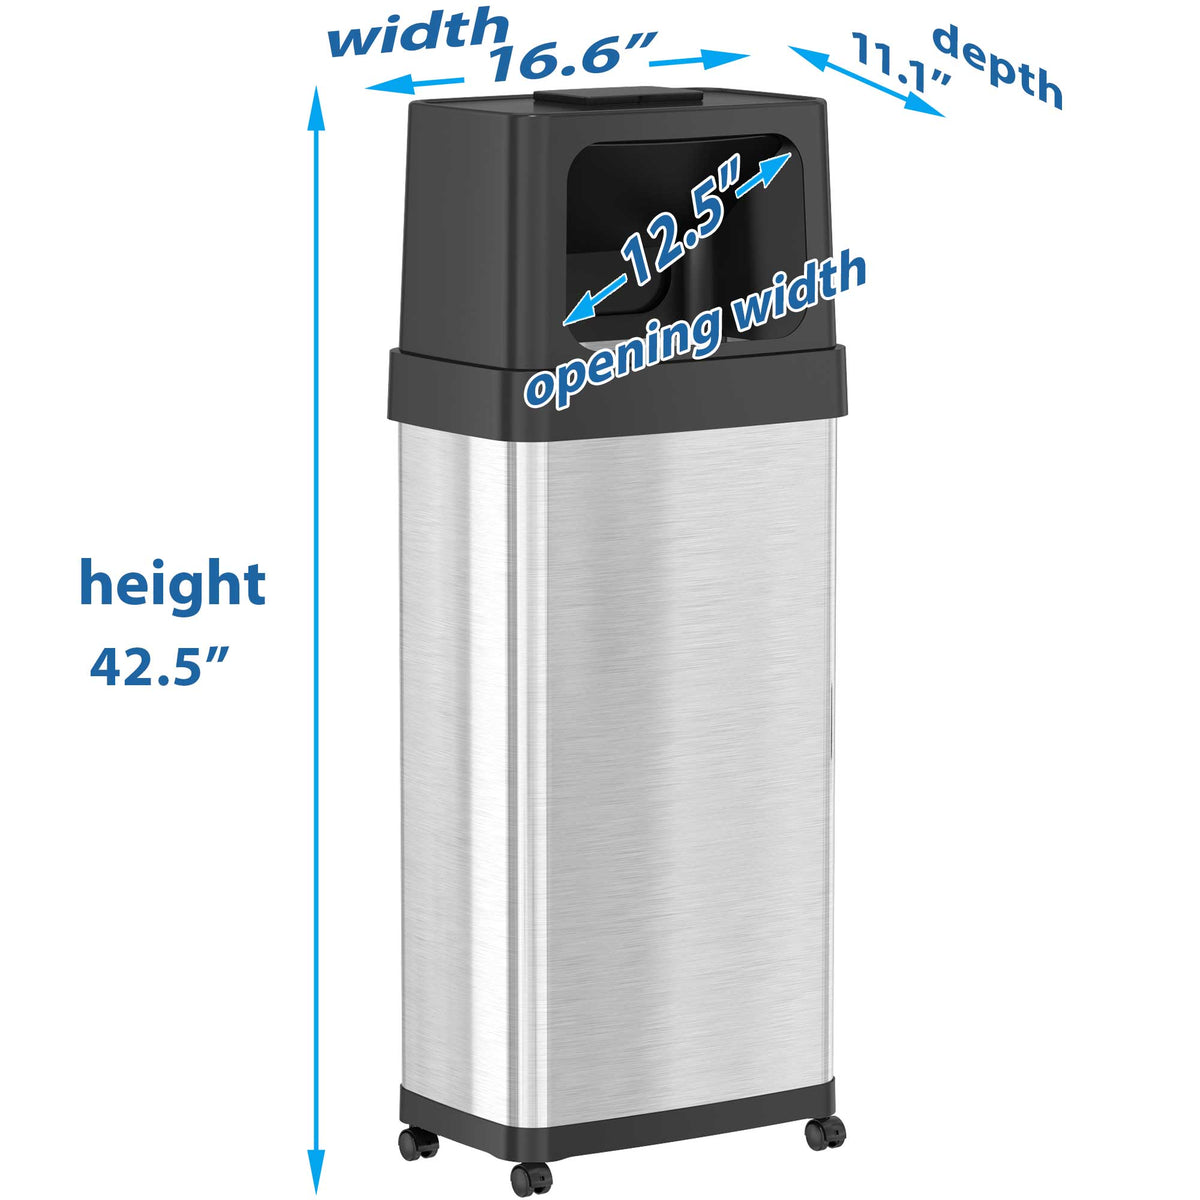 24 Gallon / 91 Liter Dual Push Door Trash Can with Wheels dimensions